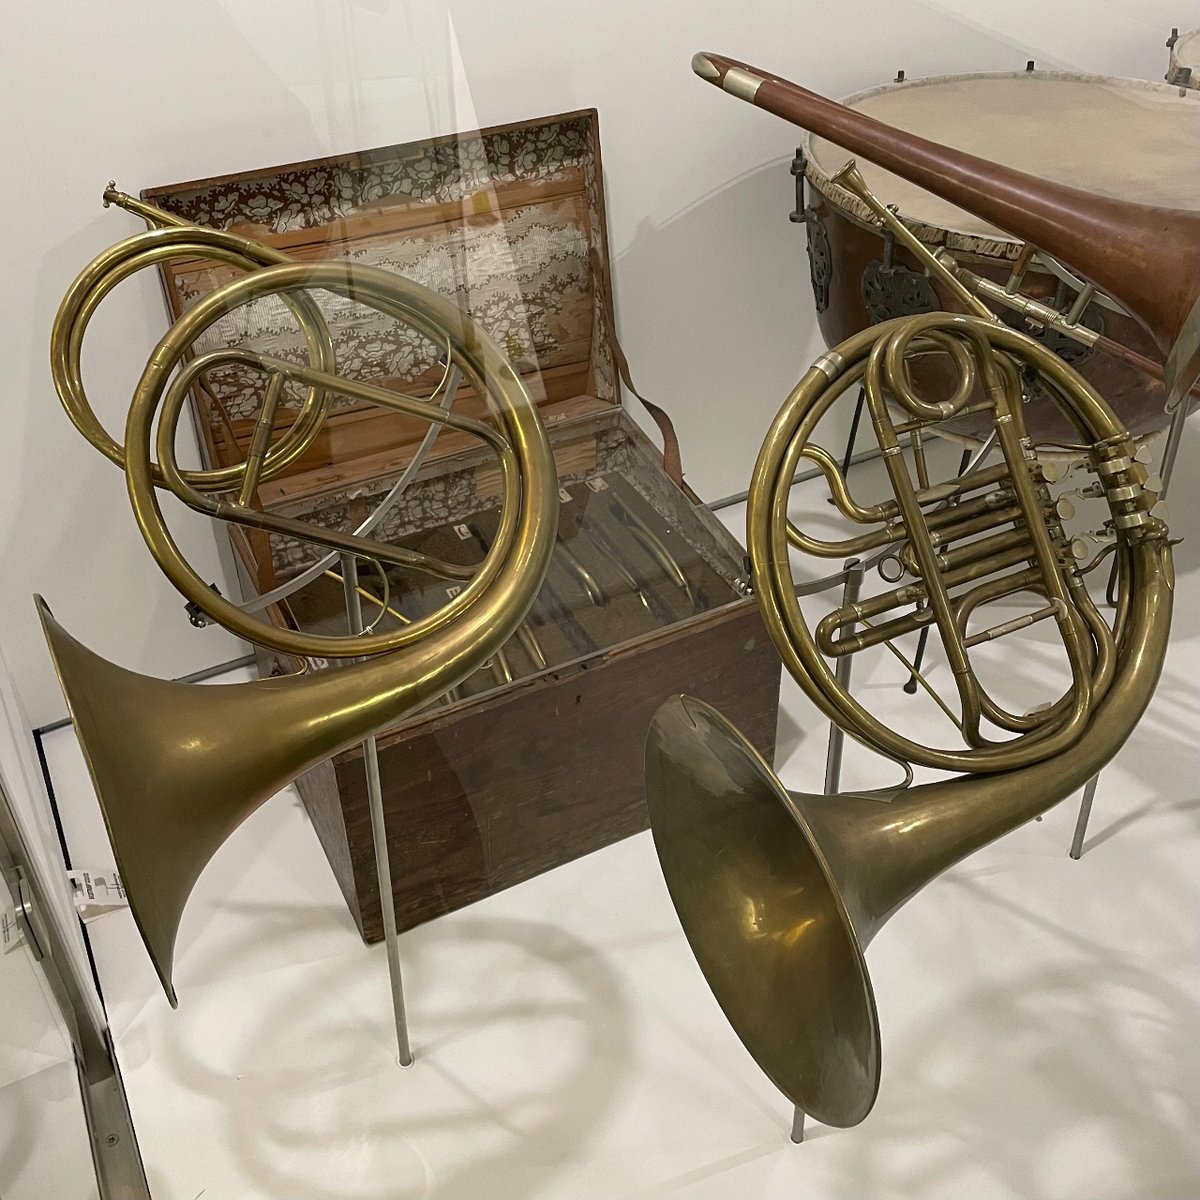 Whilst I was in Stuttgart last week playing for the Internationale Bachakademie Stuttgart I took the chance to visit the Haus der Musik which had on display two instruments plus there was one in hiding! @LMWStuttgart